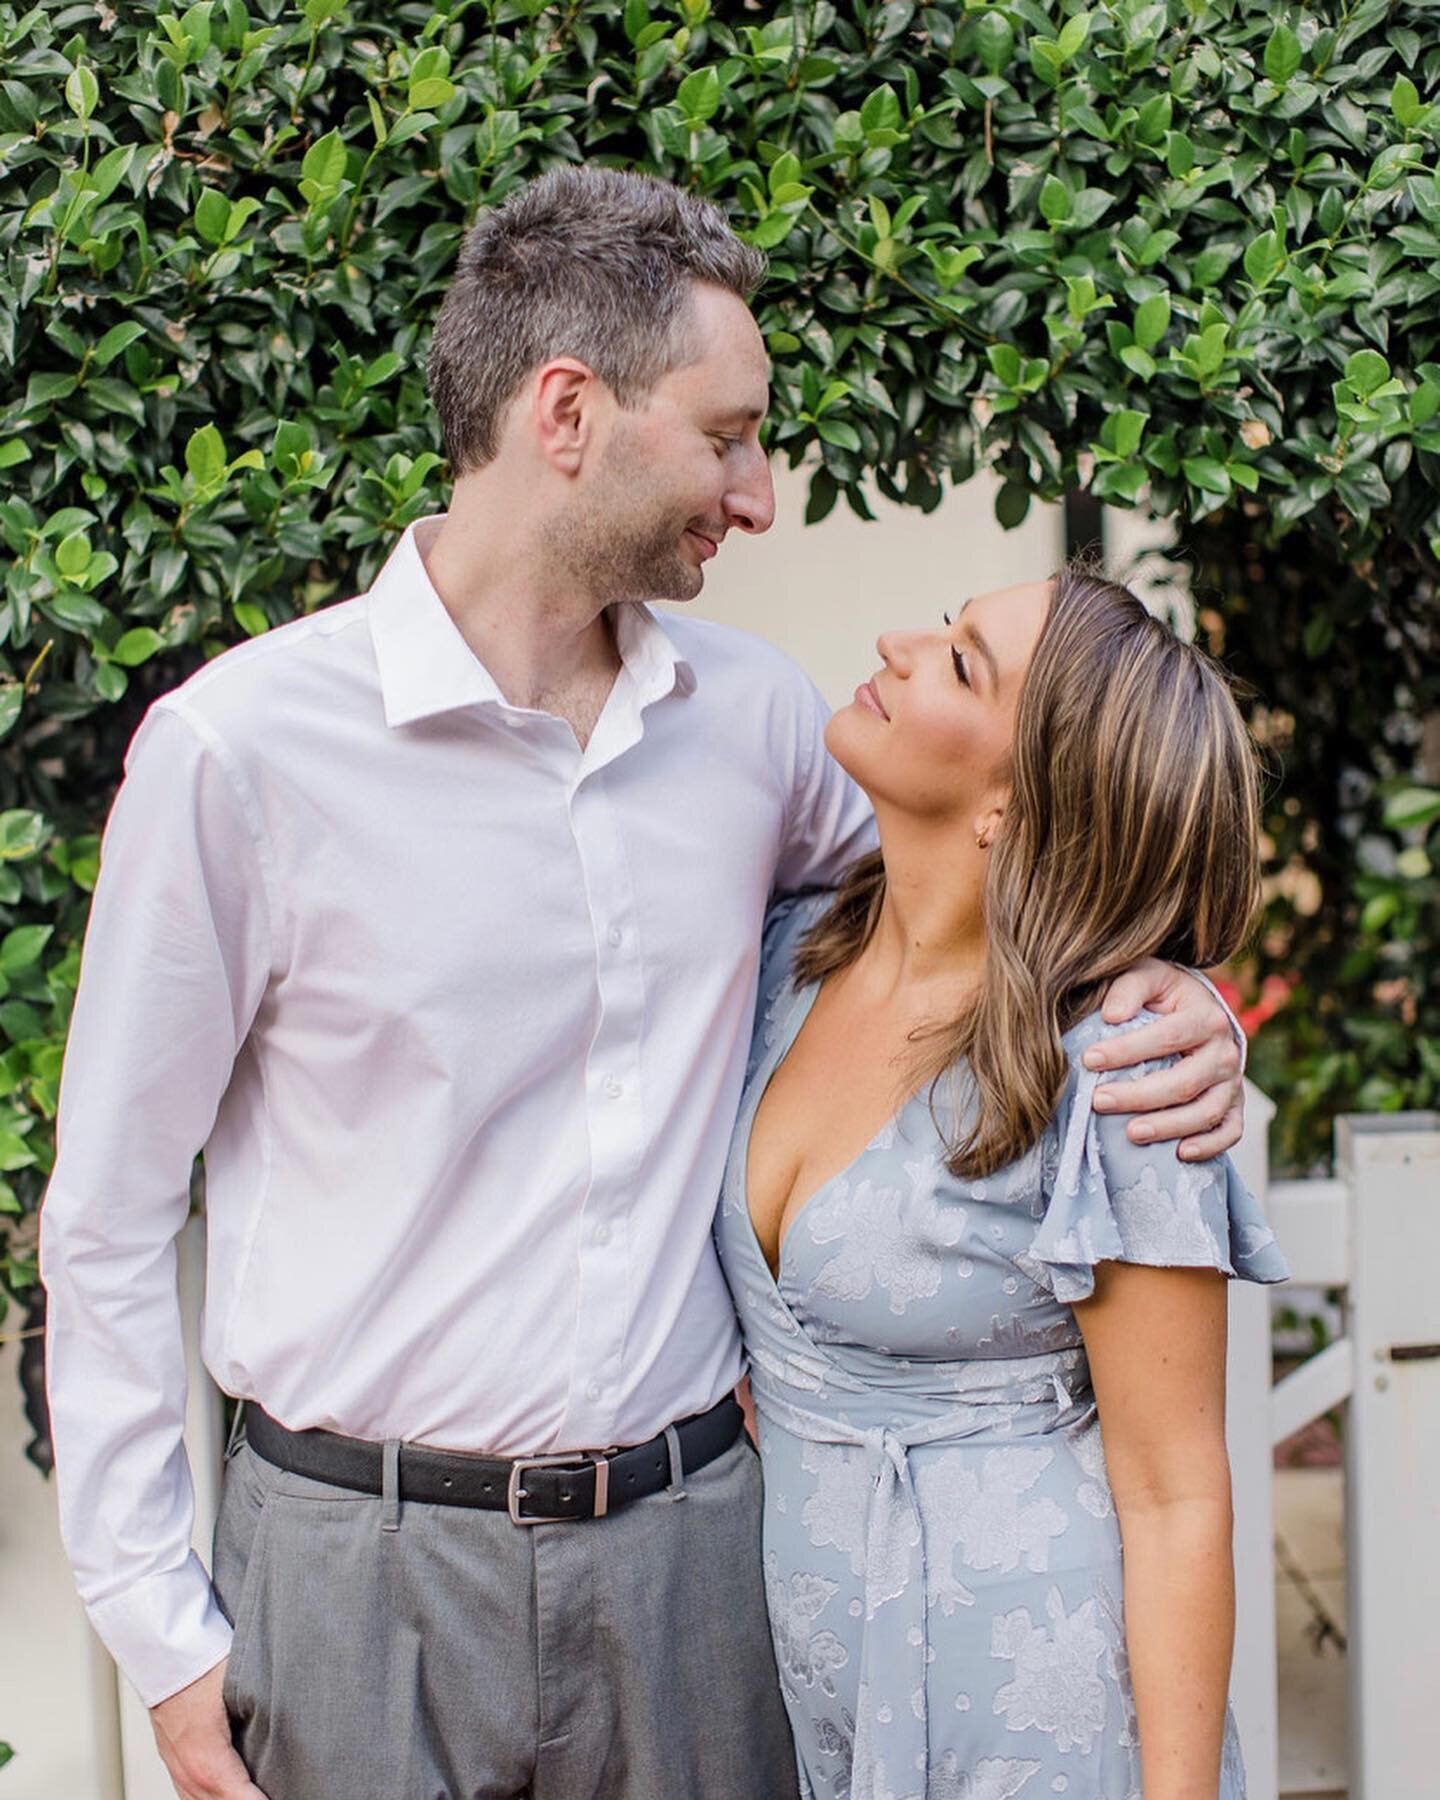 Very safe to say we are beyond ready to get these two MARRIED! 
⠀⠀⠀⠀⠀⠀⠀⠀⠀
Our team is heading to Virginia Beach today for a wedding we have sooo been looking forward to. I originally met J&amp;T back in 2019. They were friends of one of my first DC